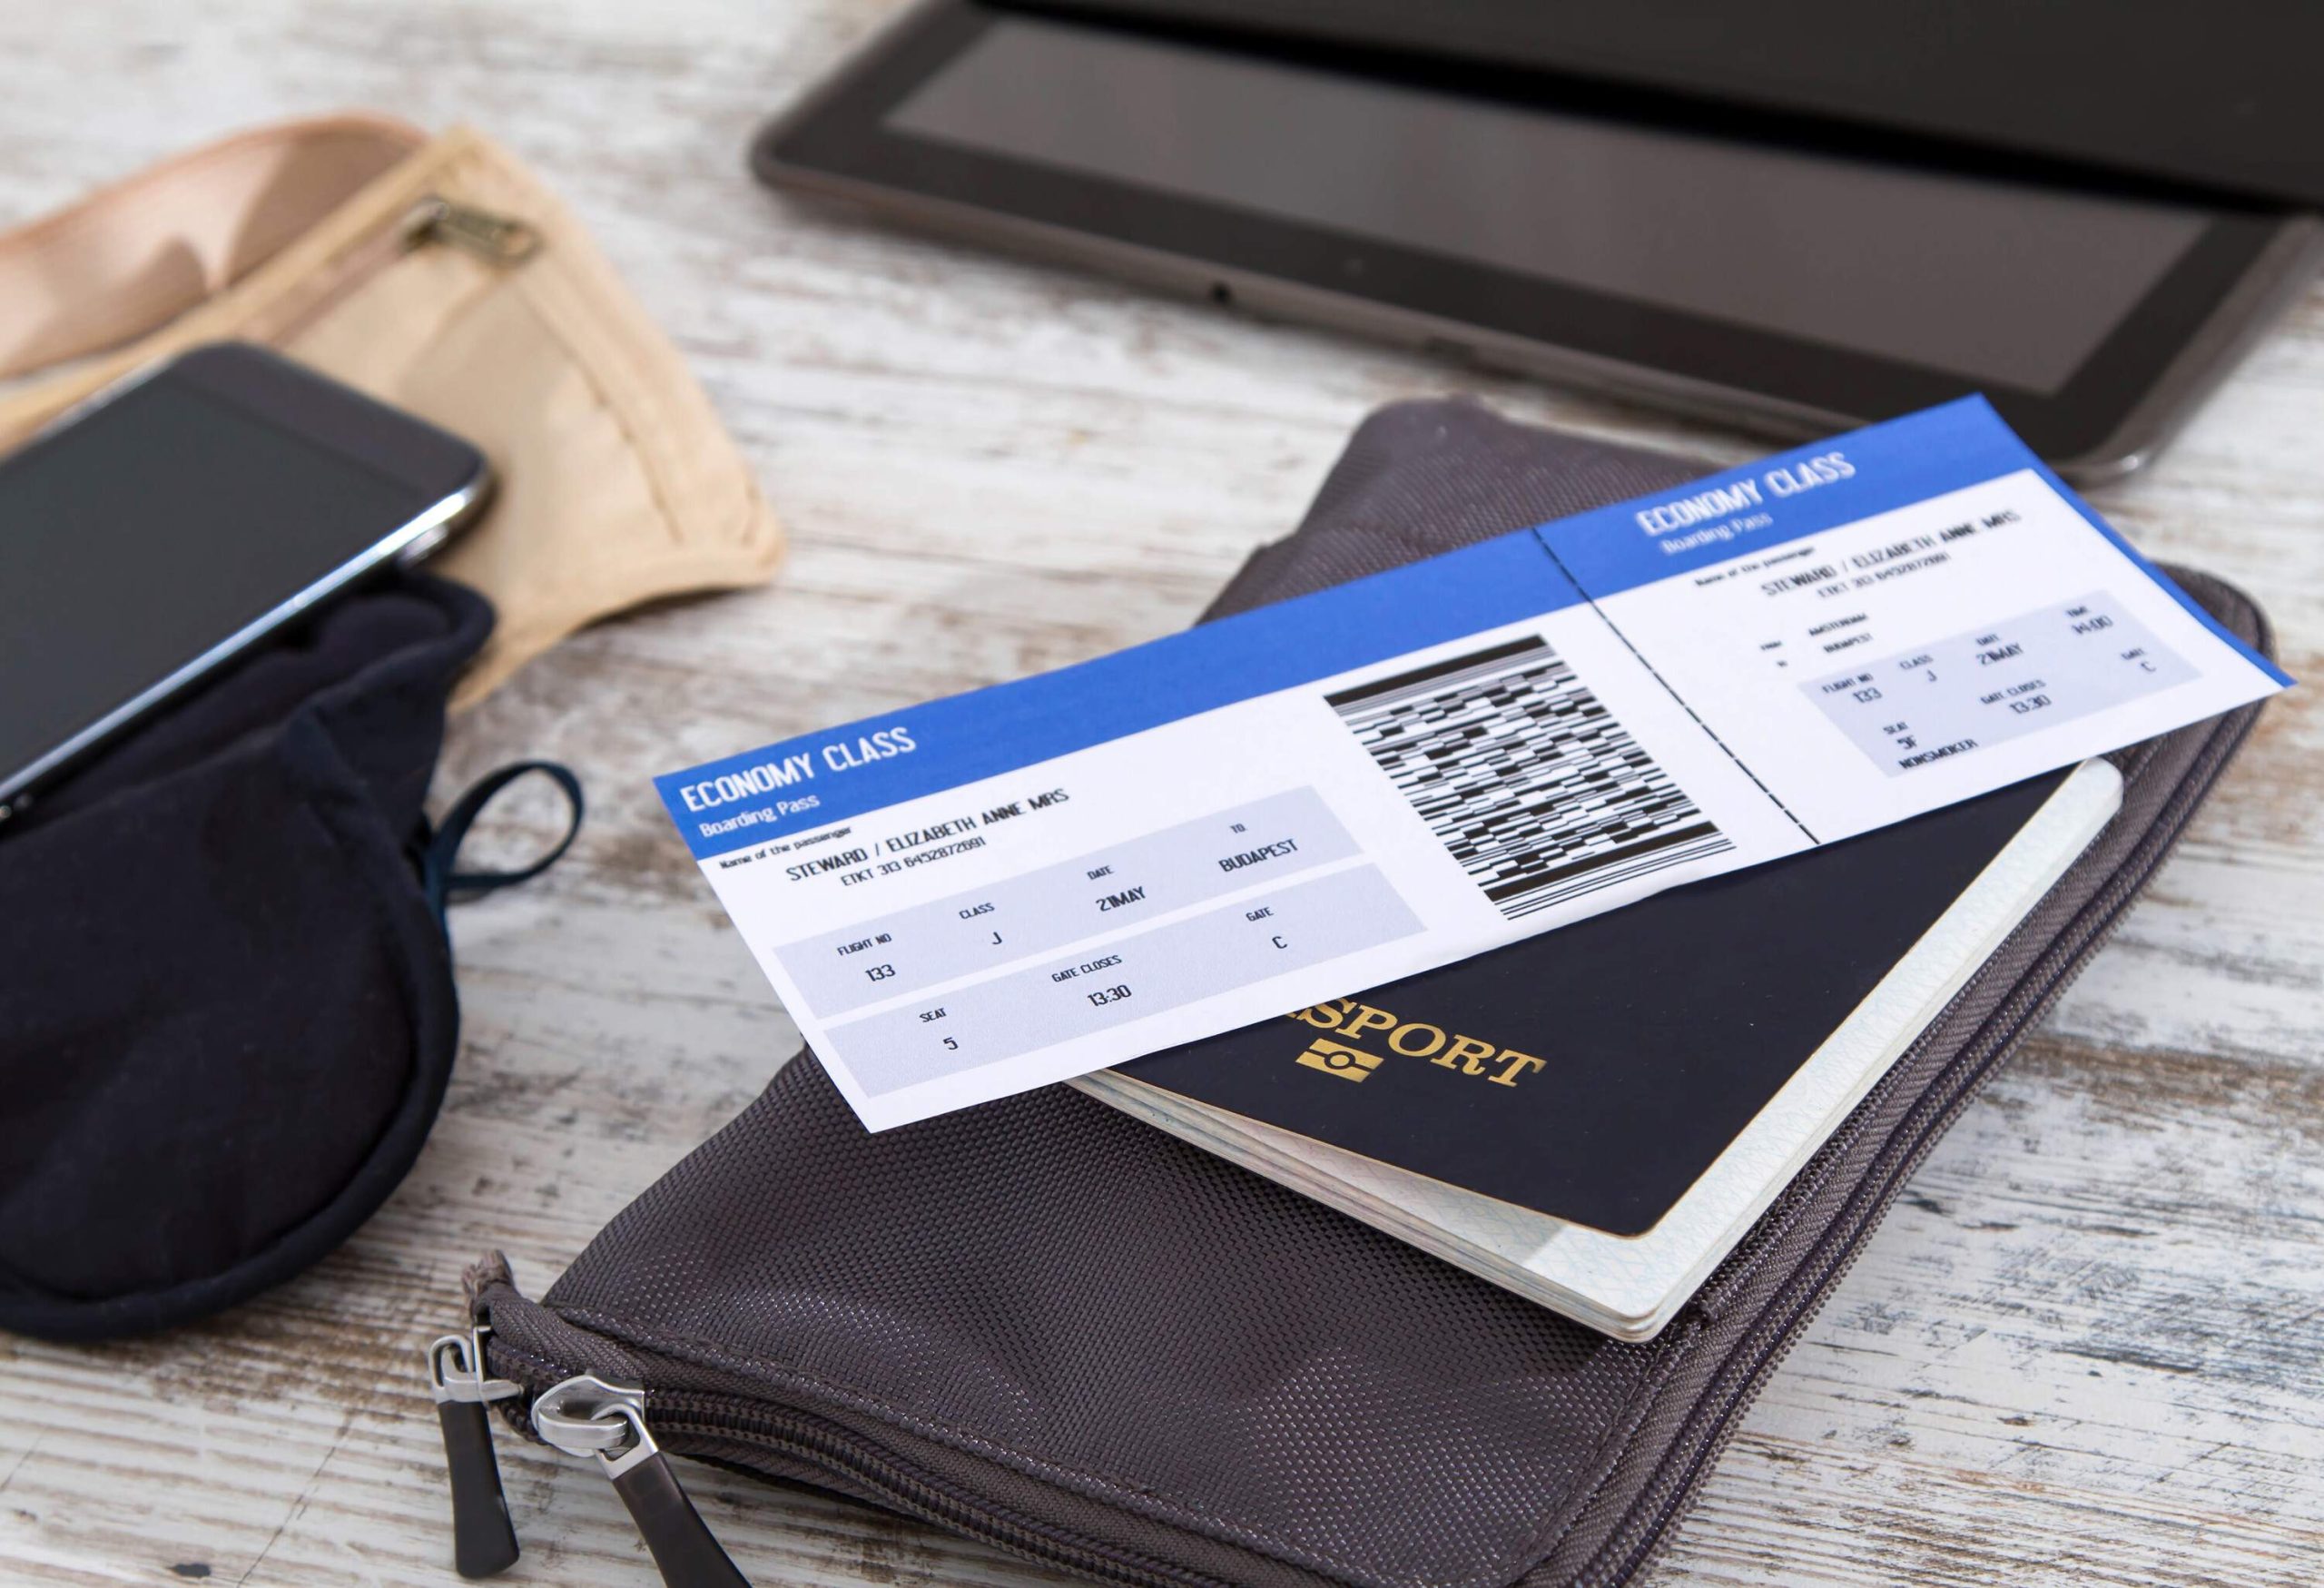 An airline ticket, passport, and electronics are arranged neatly on a surface, ready for travel.